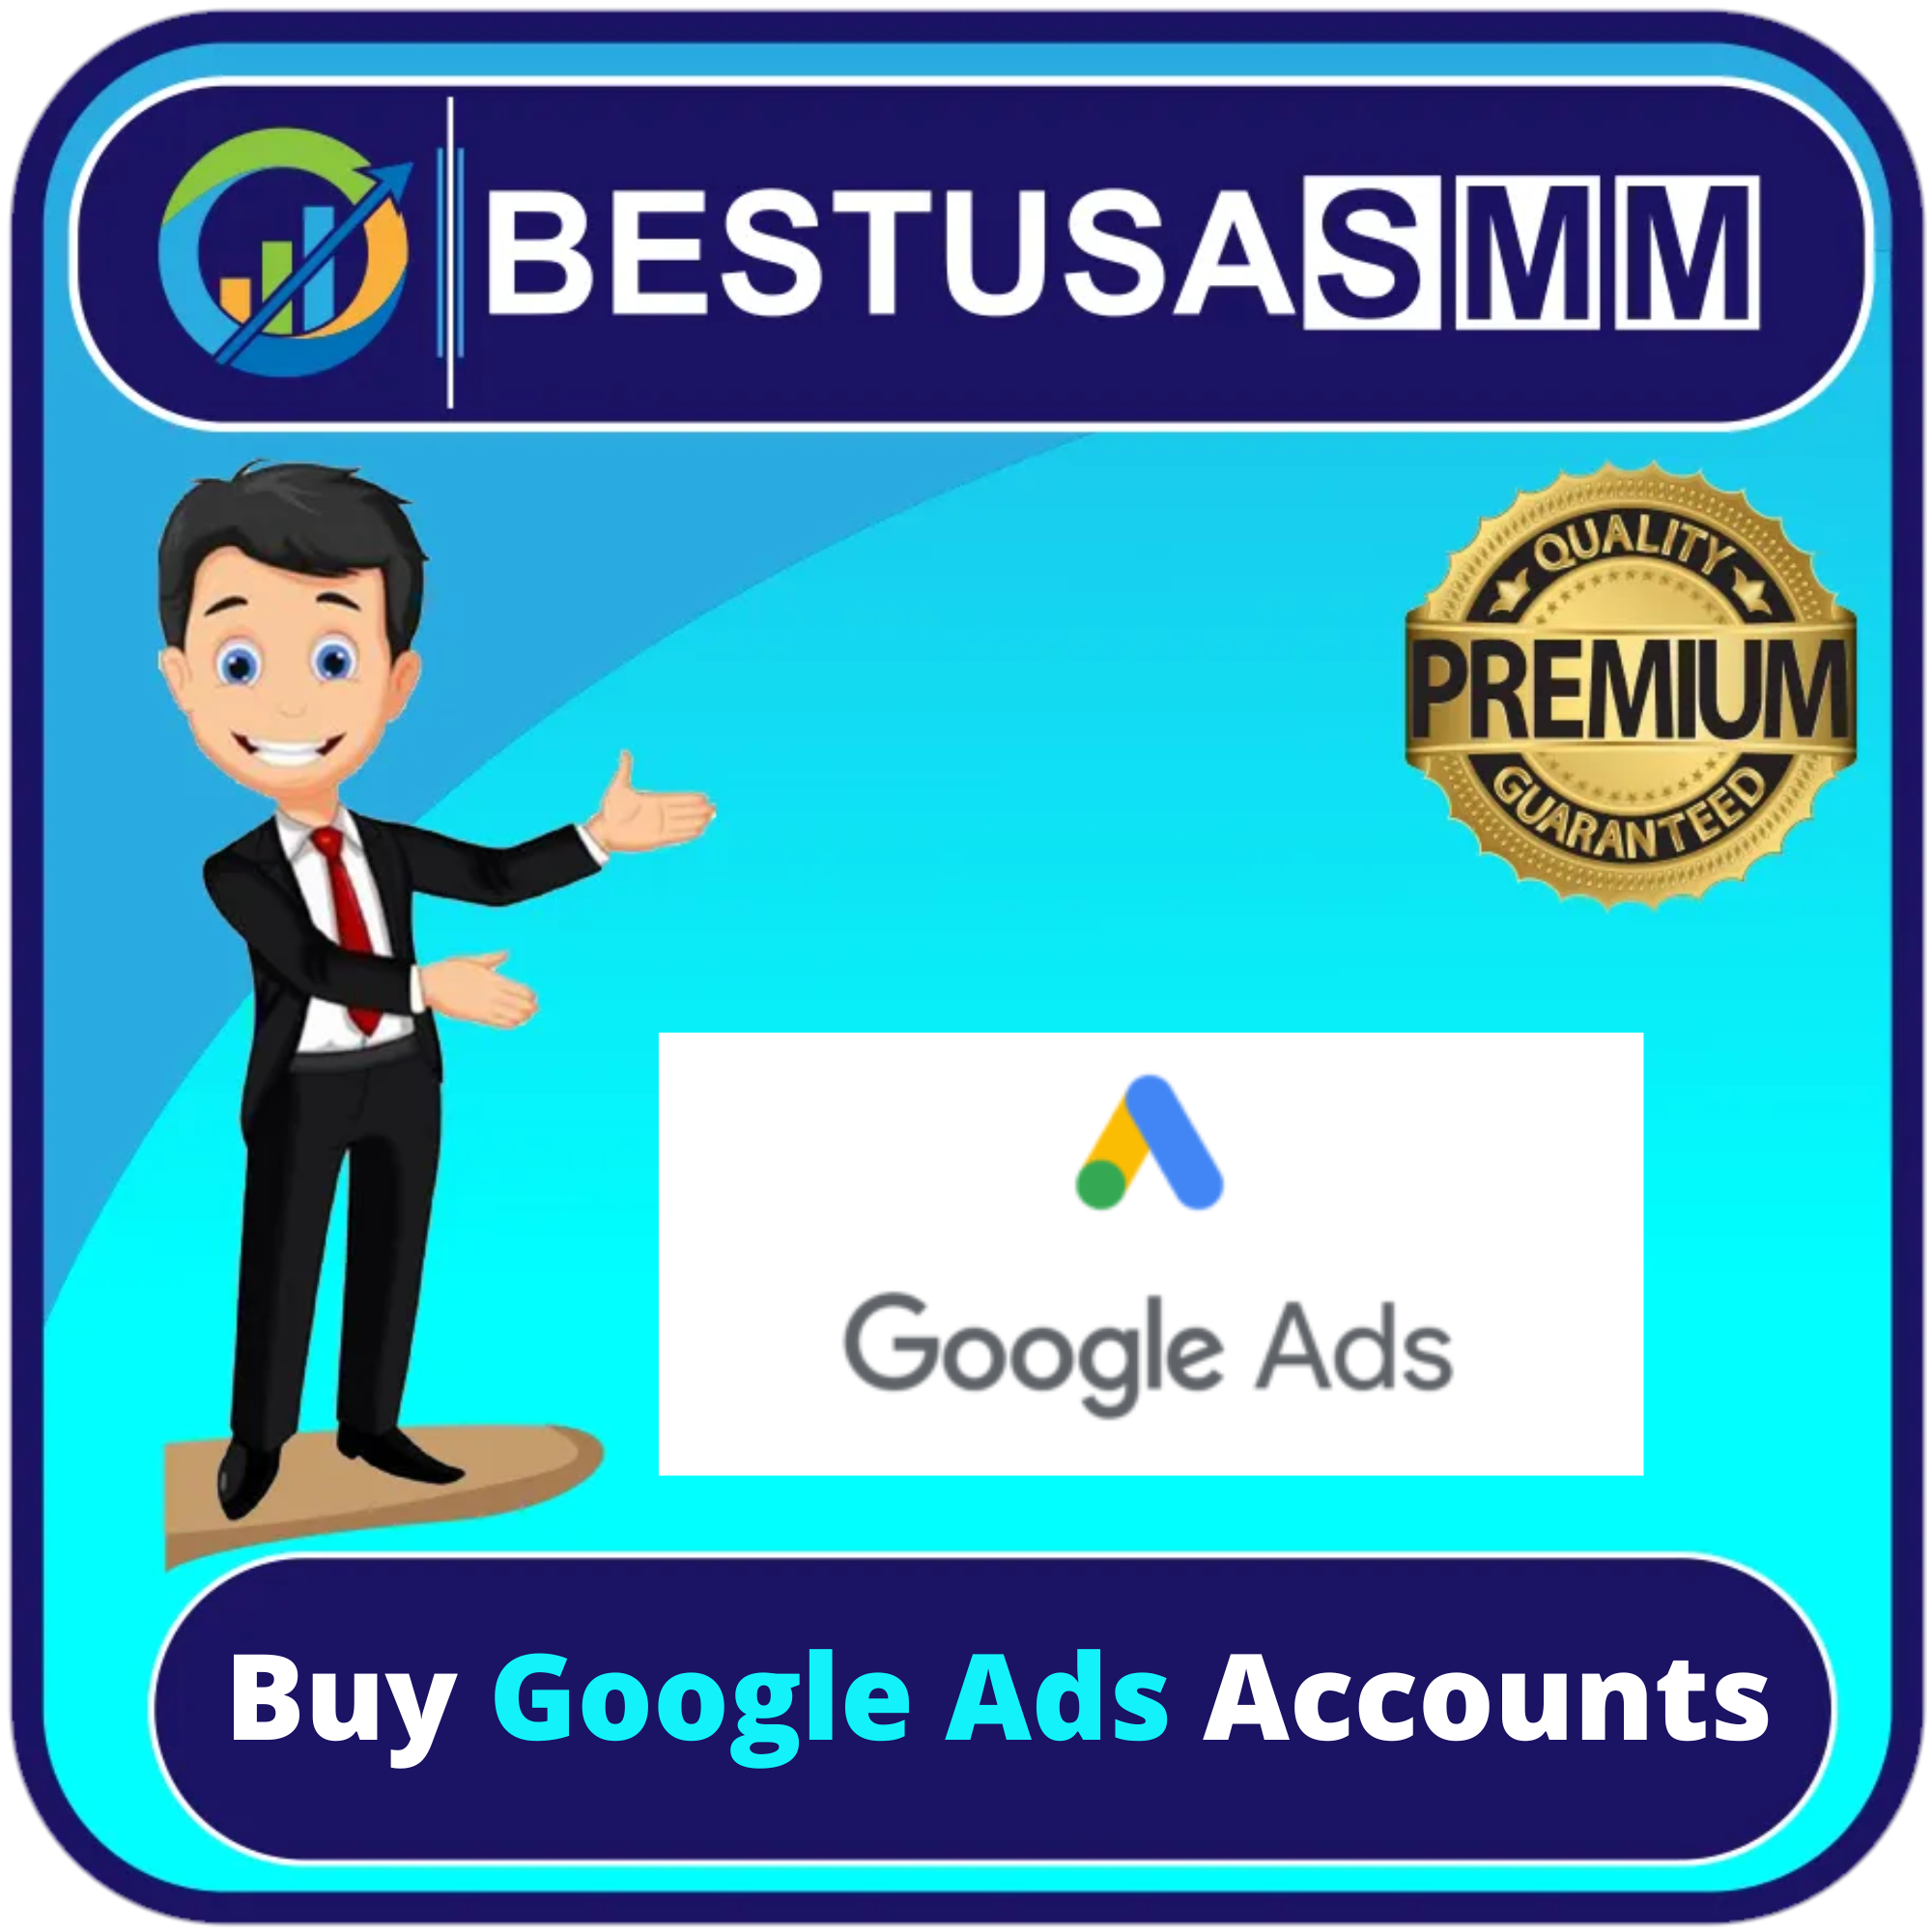 Buy google ads accounts - 100% Real Google Ads For Sale 2022